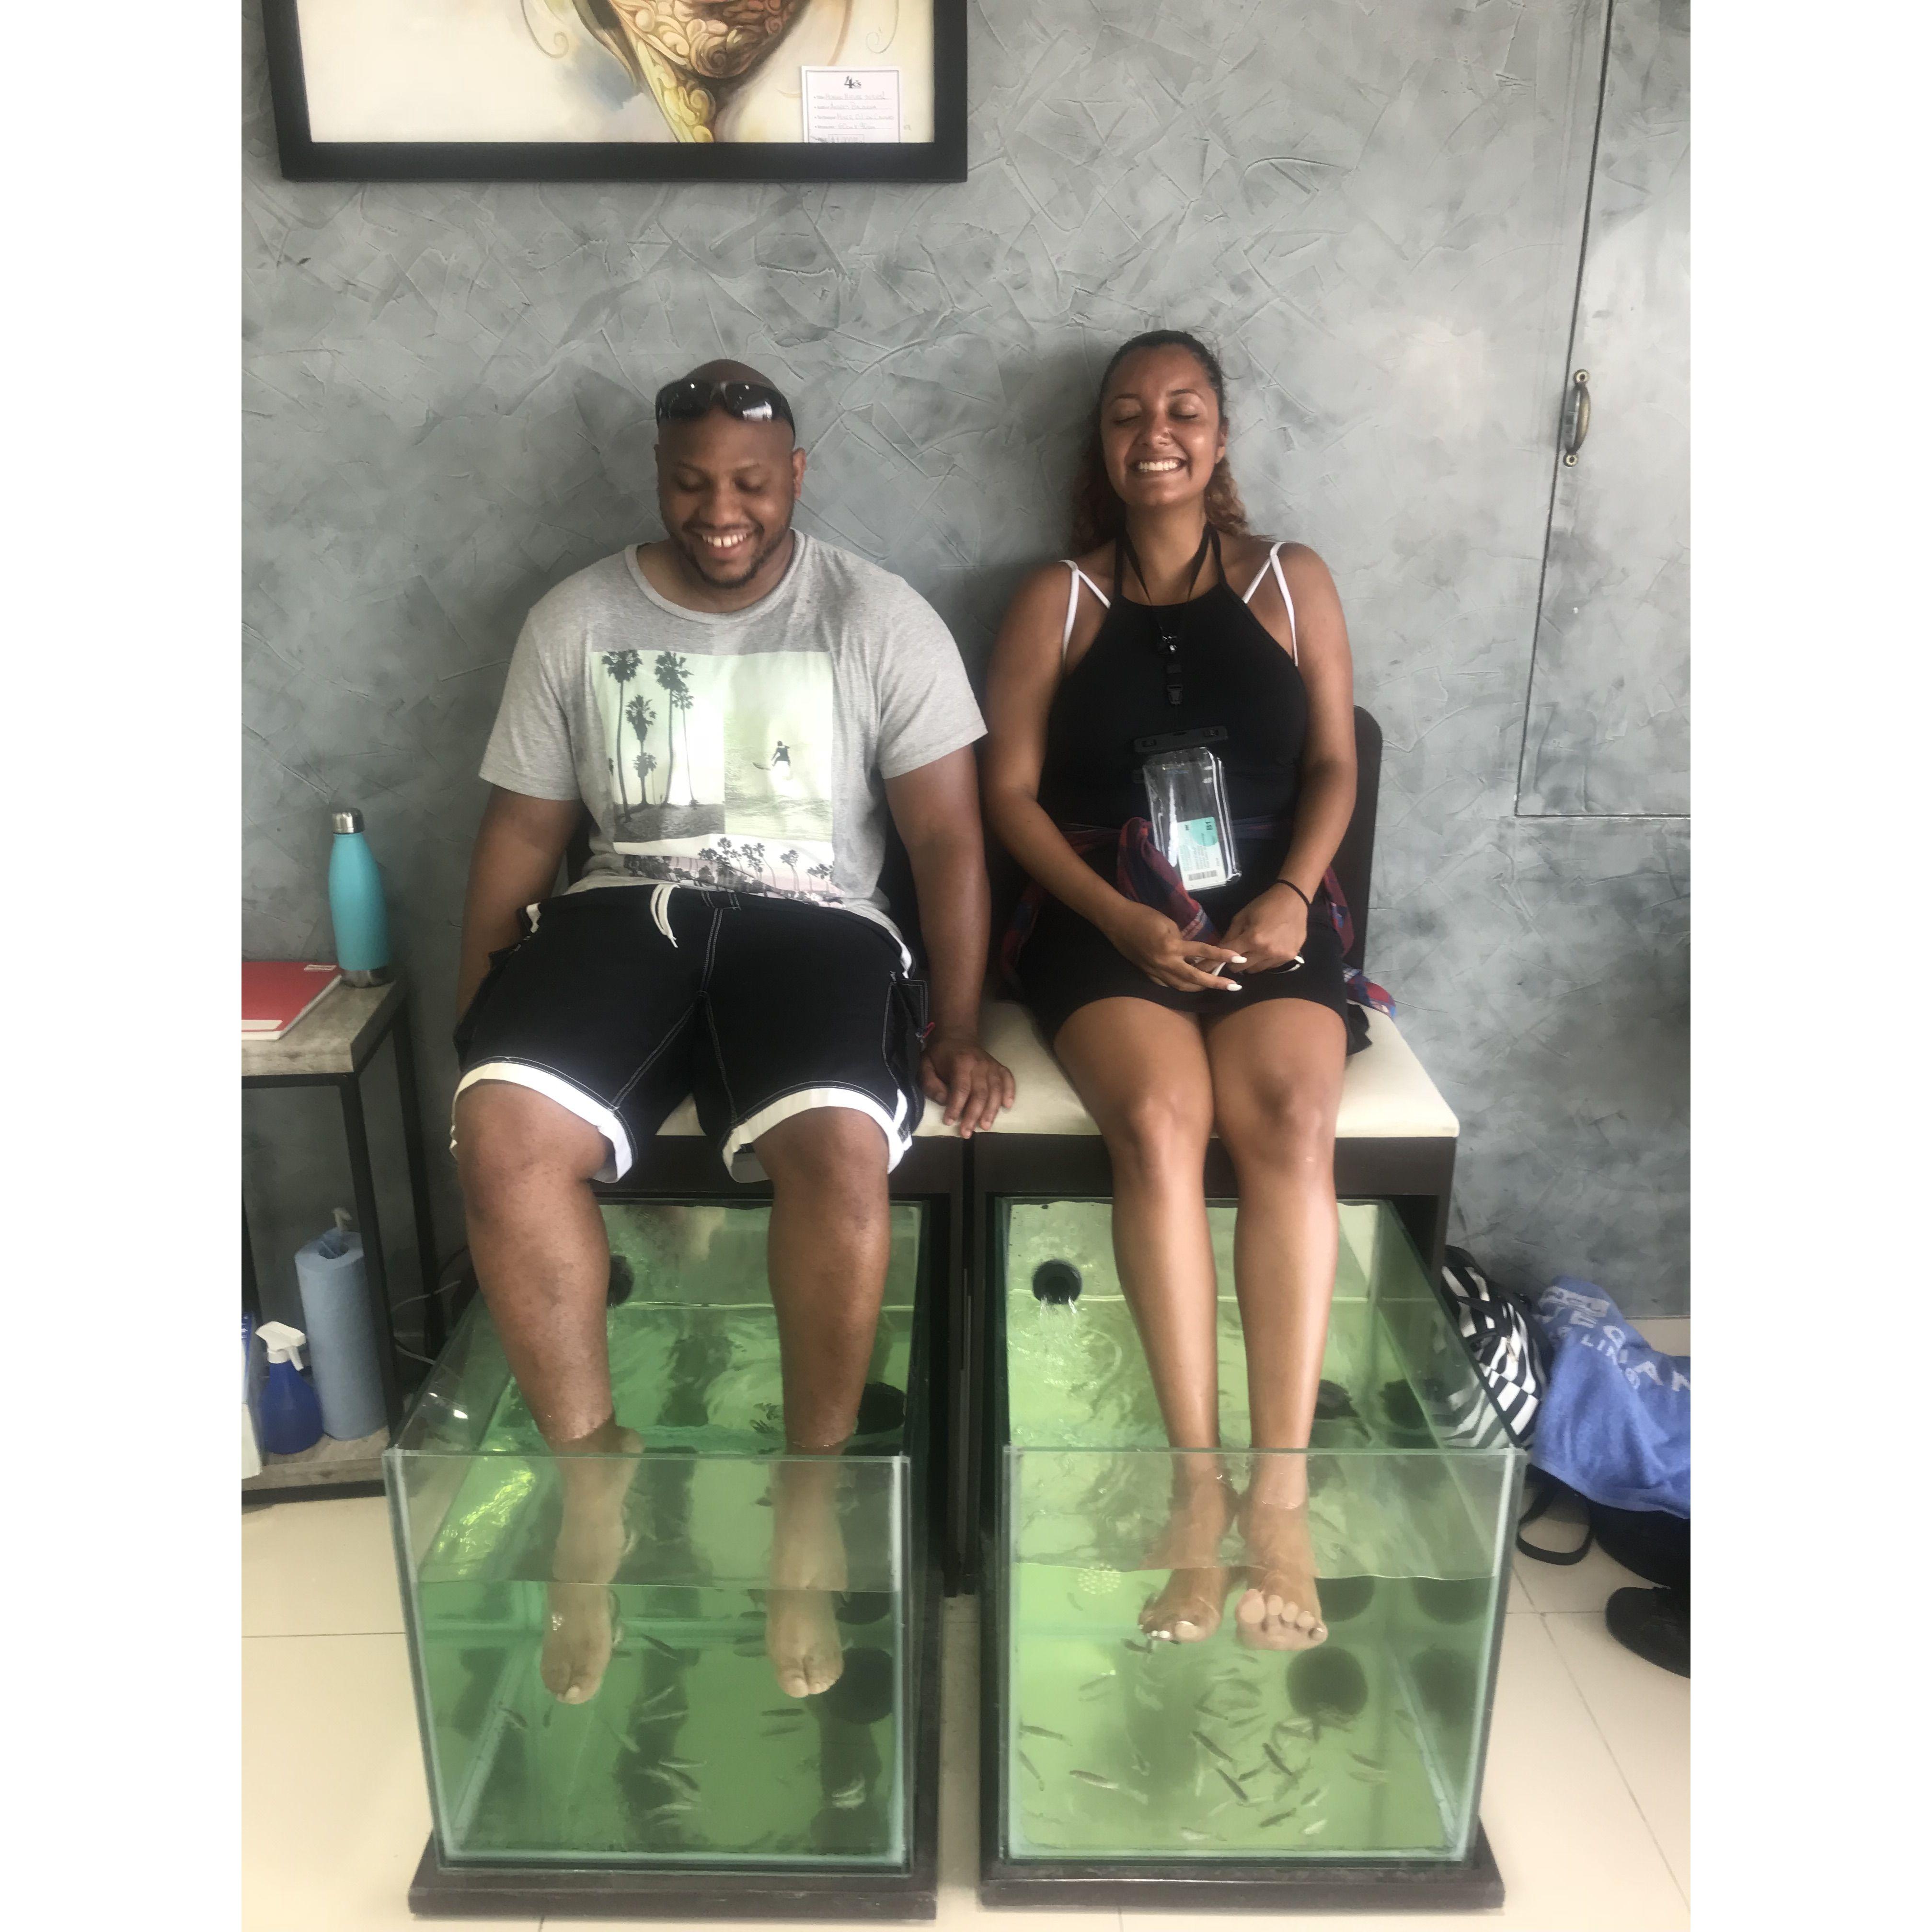 Getting our feet cleaned in Mexico. One of our stops of our cruise, 2018.